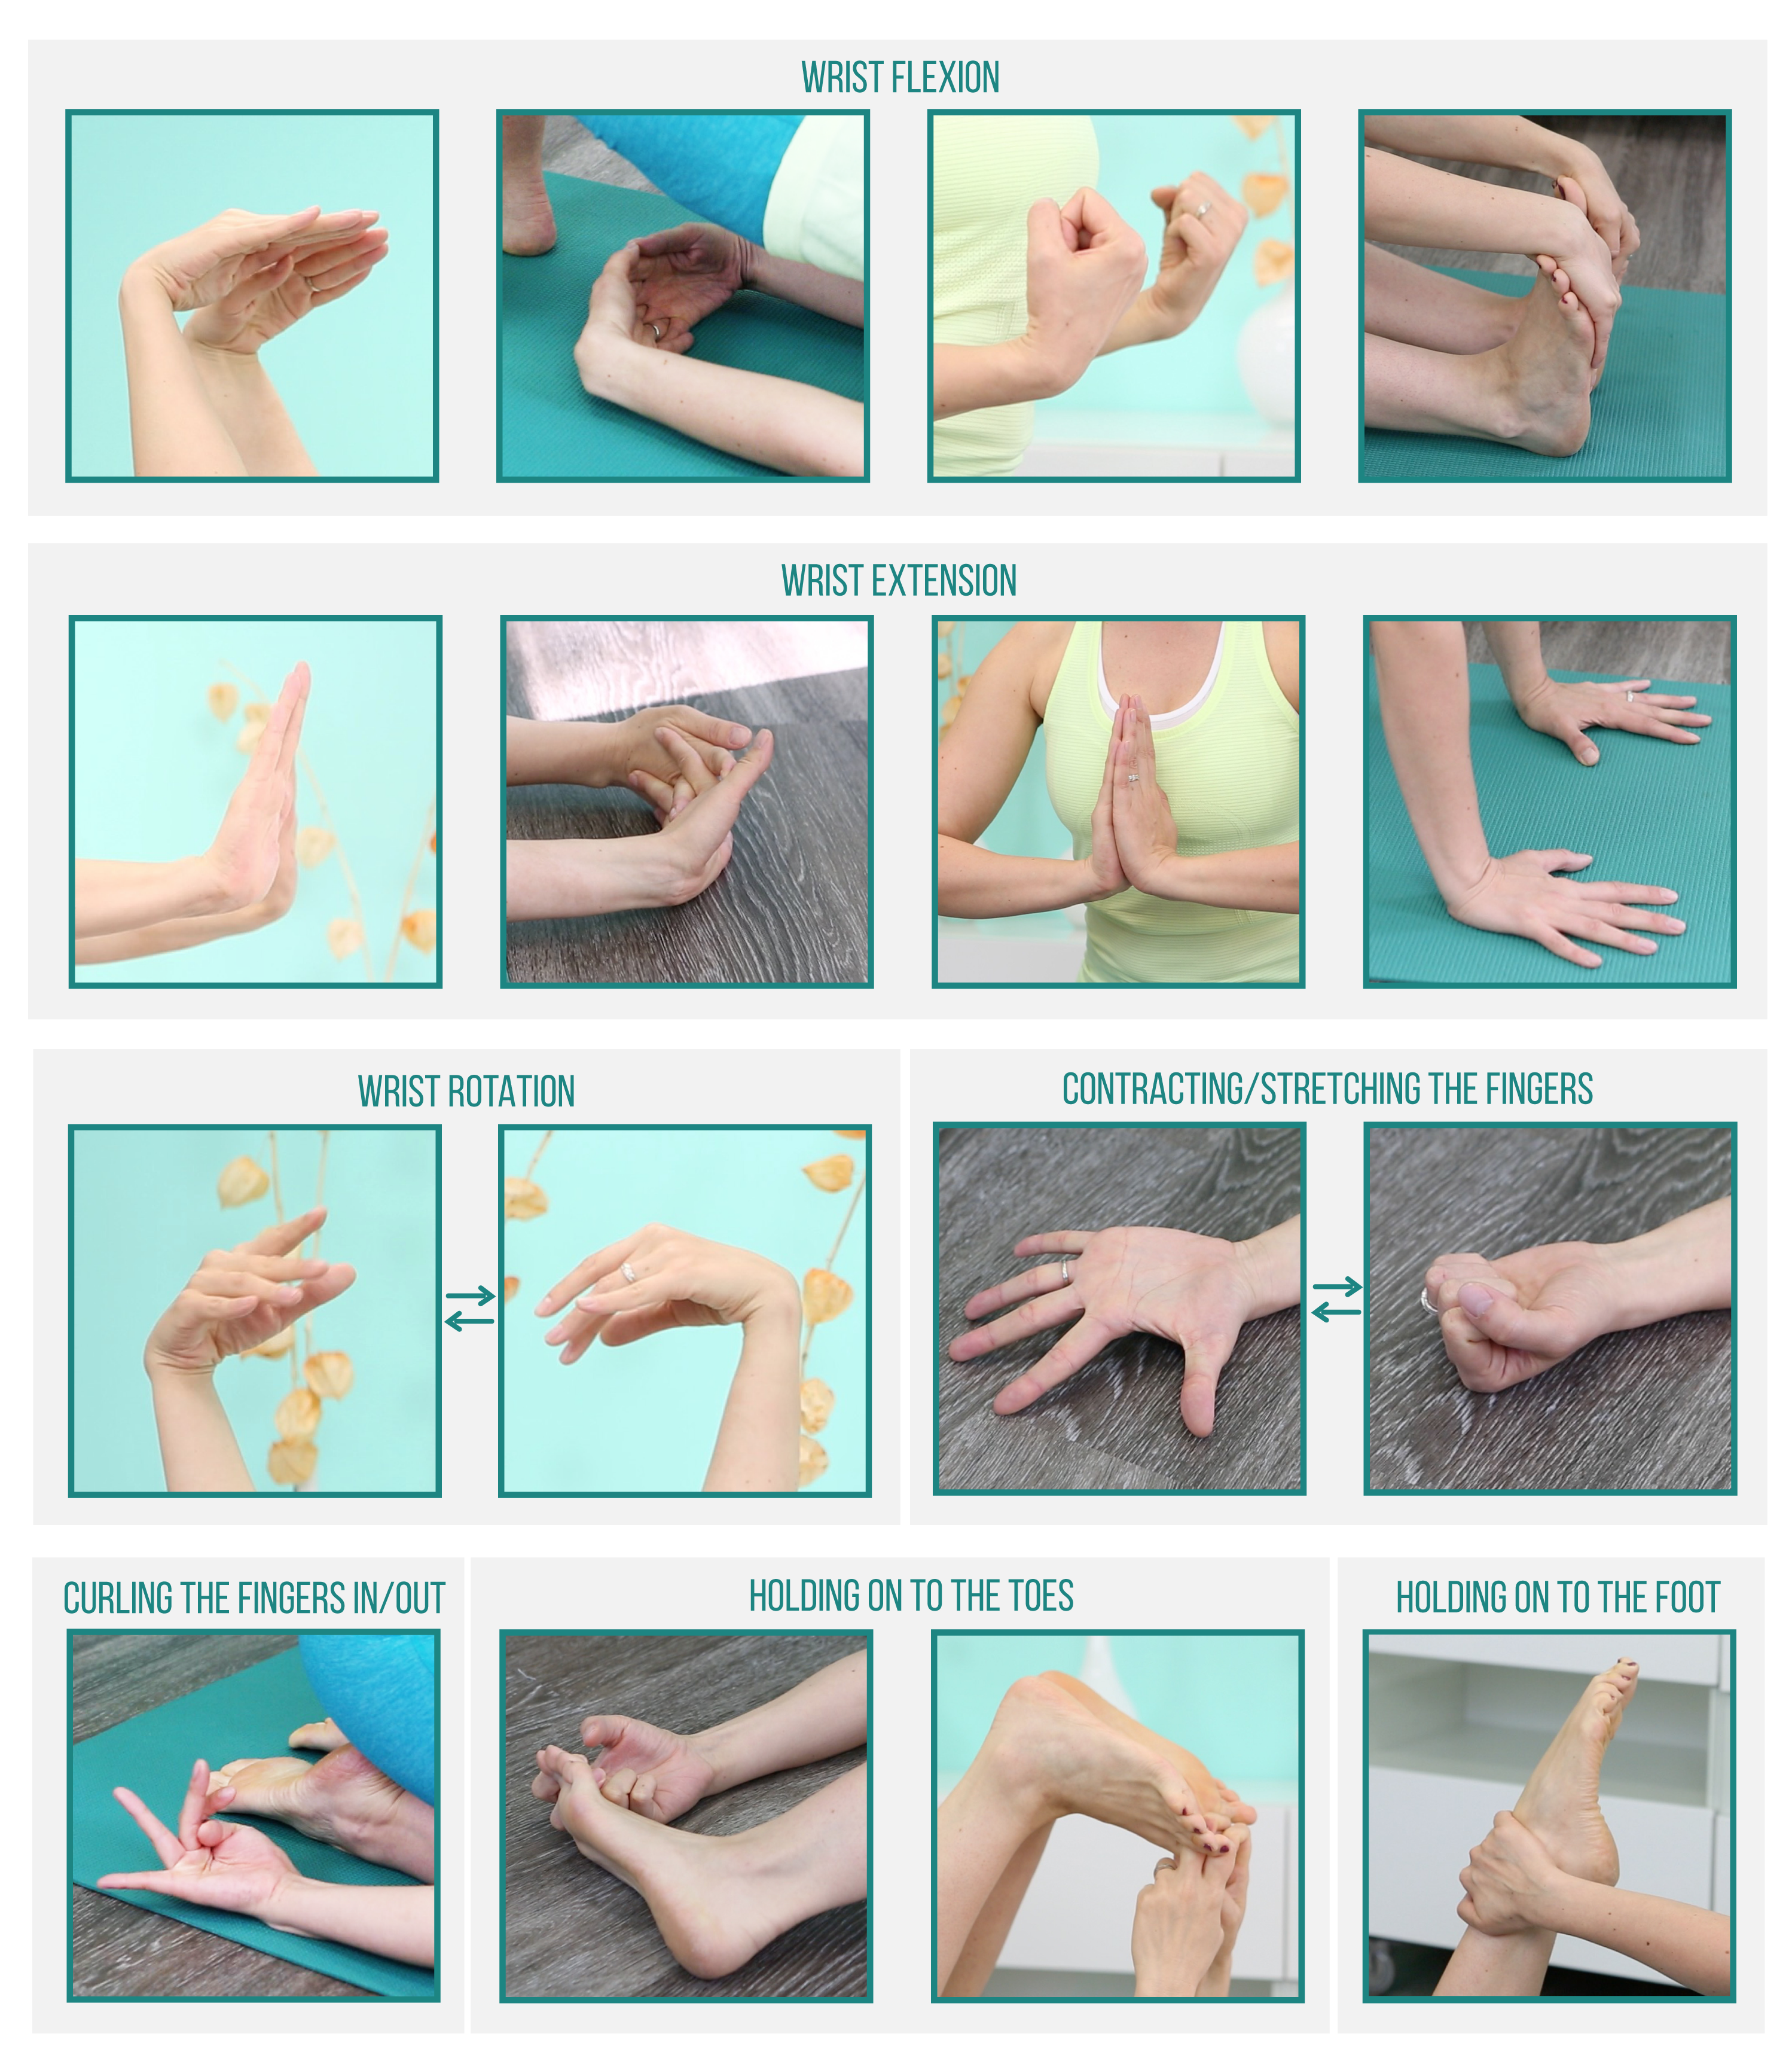 https://sequencewiz.org/wp-content/uploads/2016/08/Hand-positions-in-poses.png